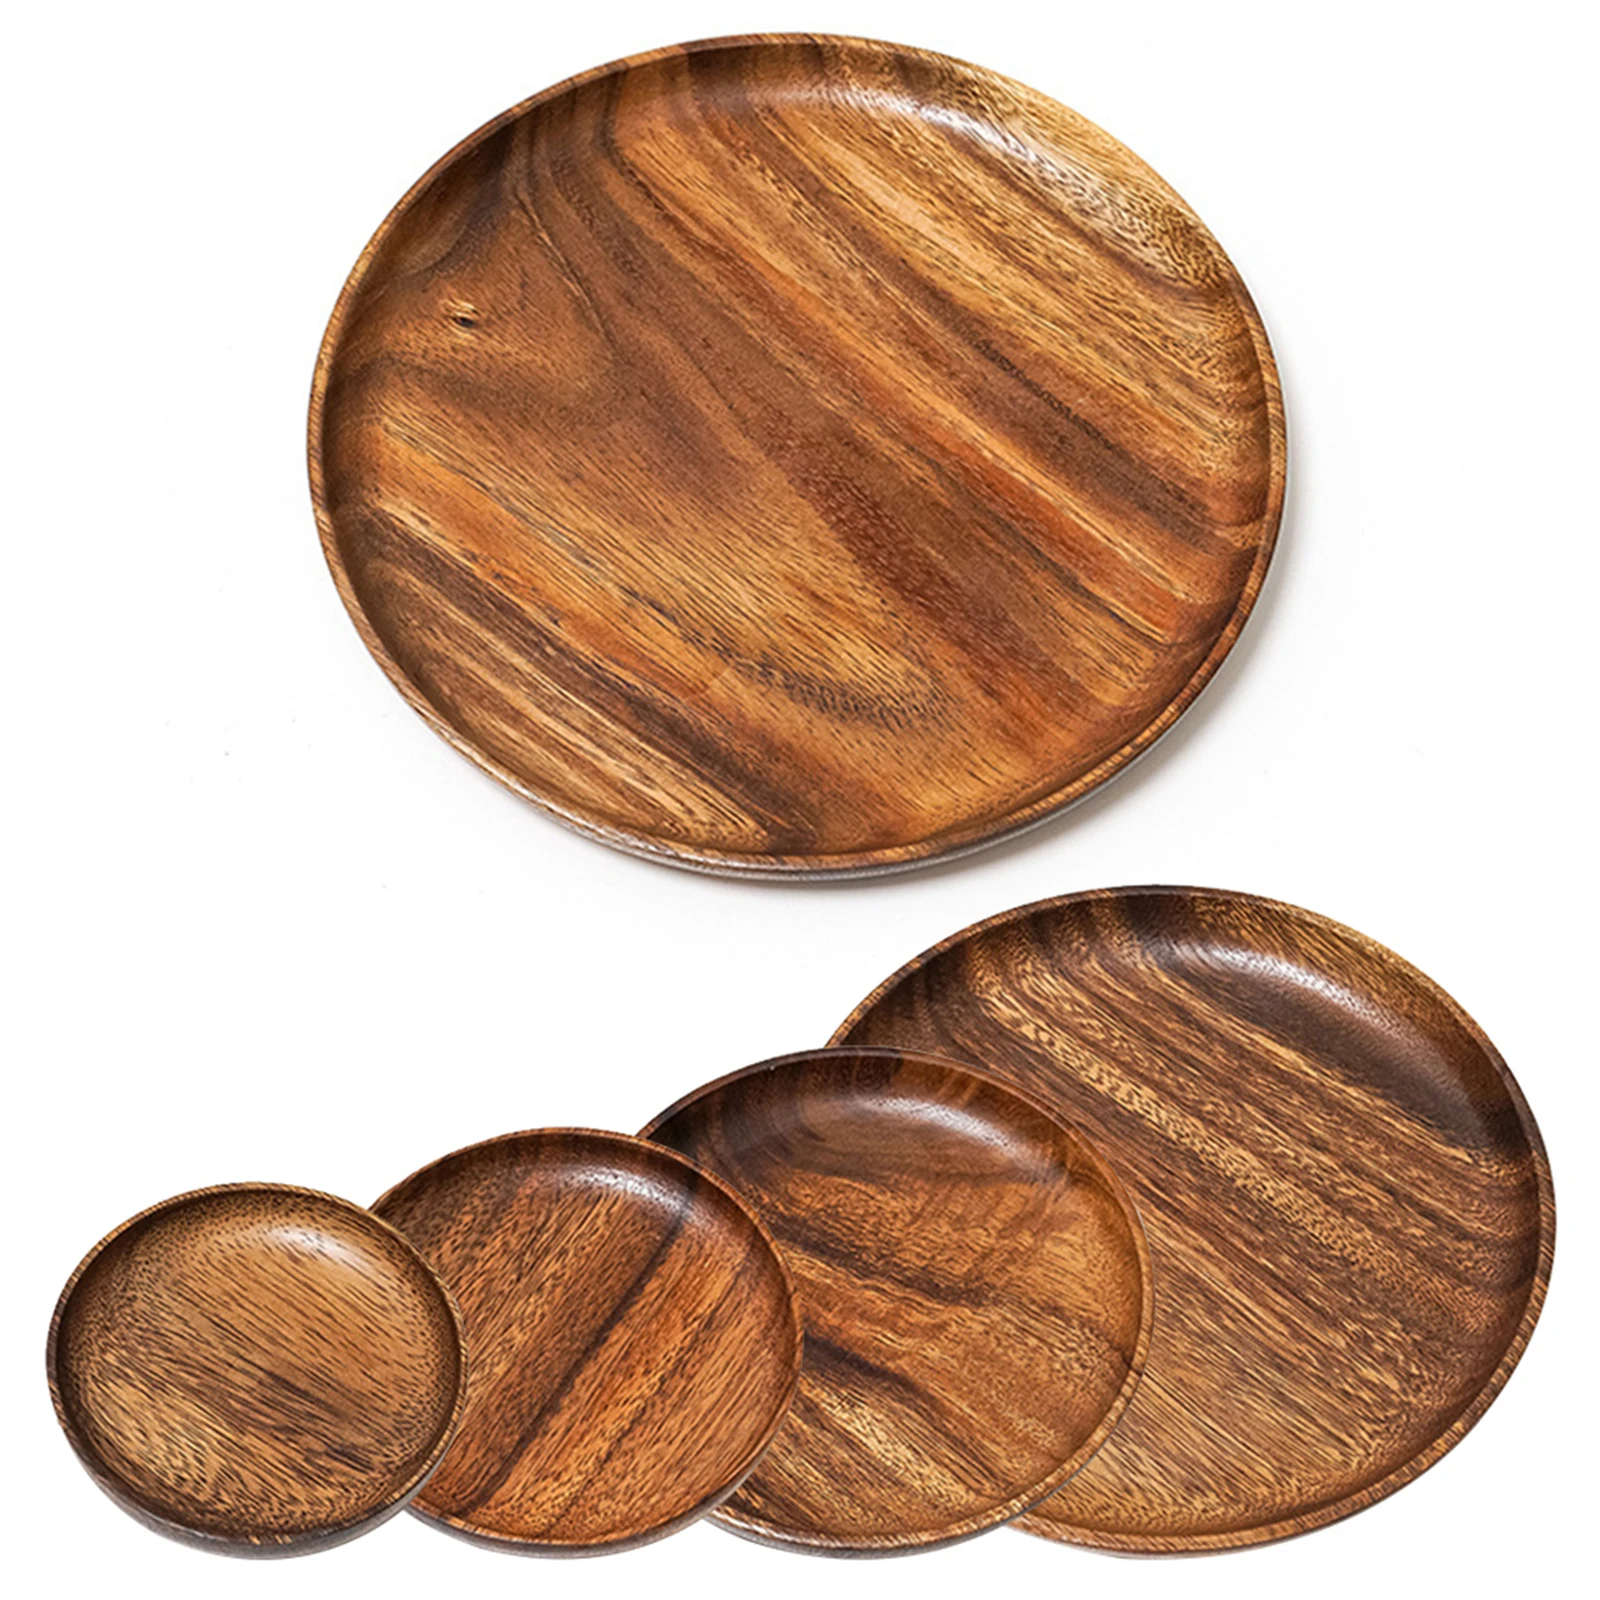 

Hand-made Wood Acacia Dinner Plates Unbreakable Round Wood Plates for Fruits Dishes Snacks Dessert Serving Tray Tableware